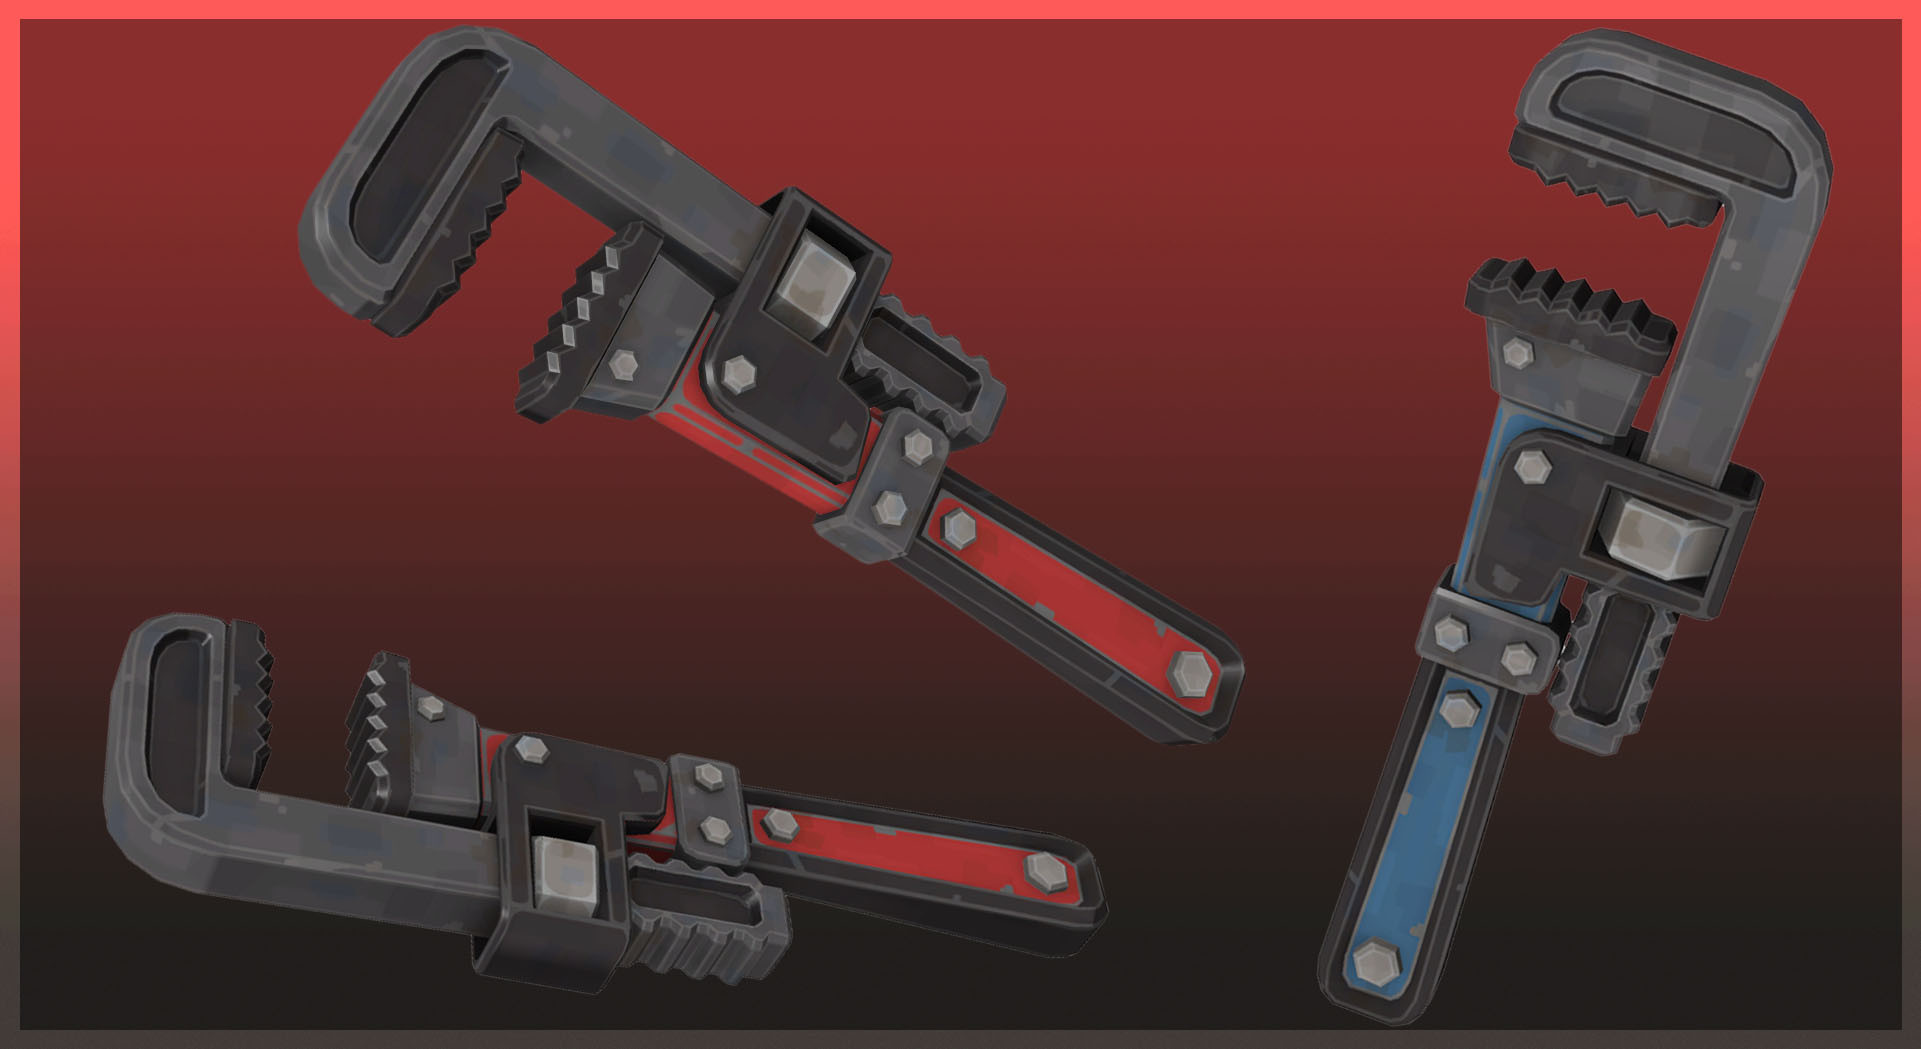 Wrench for the Engineer Class